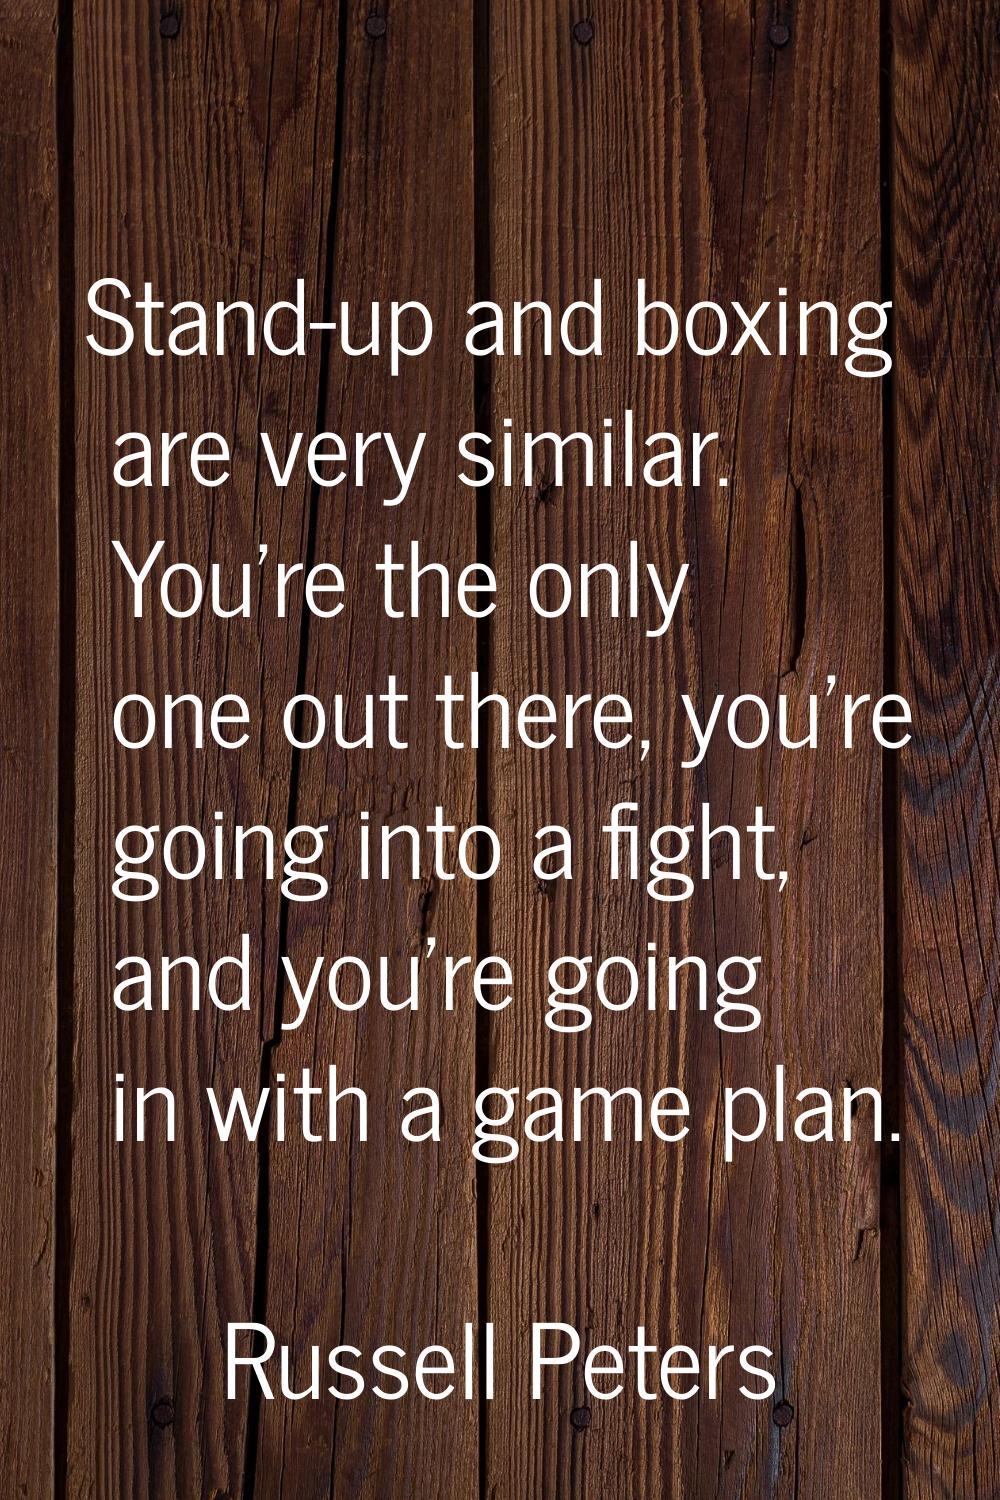 Stand-up and boxing are very similar. You're the only one out there, you're going into a fight, and